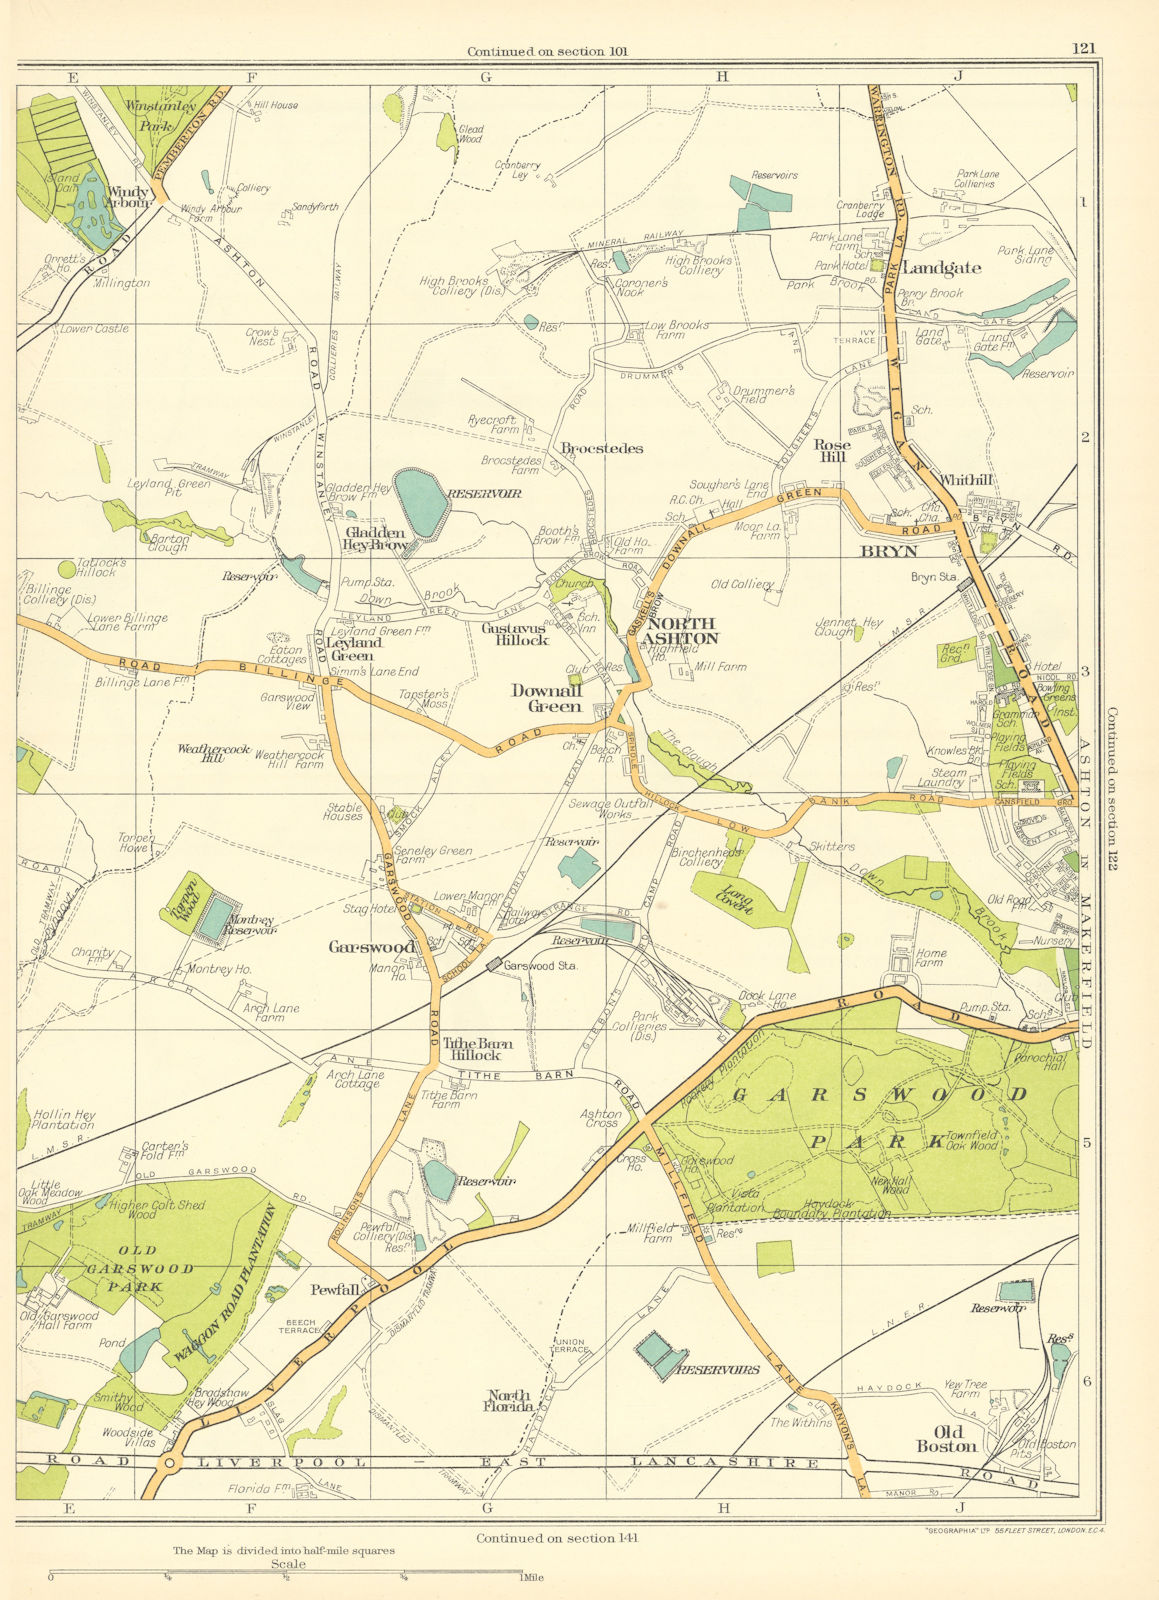 LANCS North Ashton in Makerfield Downall Grn Bryn Garswood Old Boston 1935 map